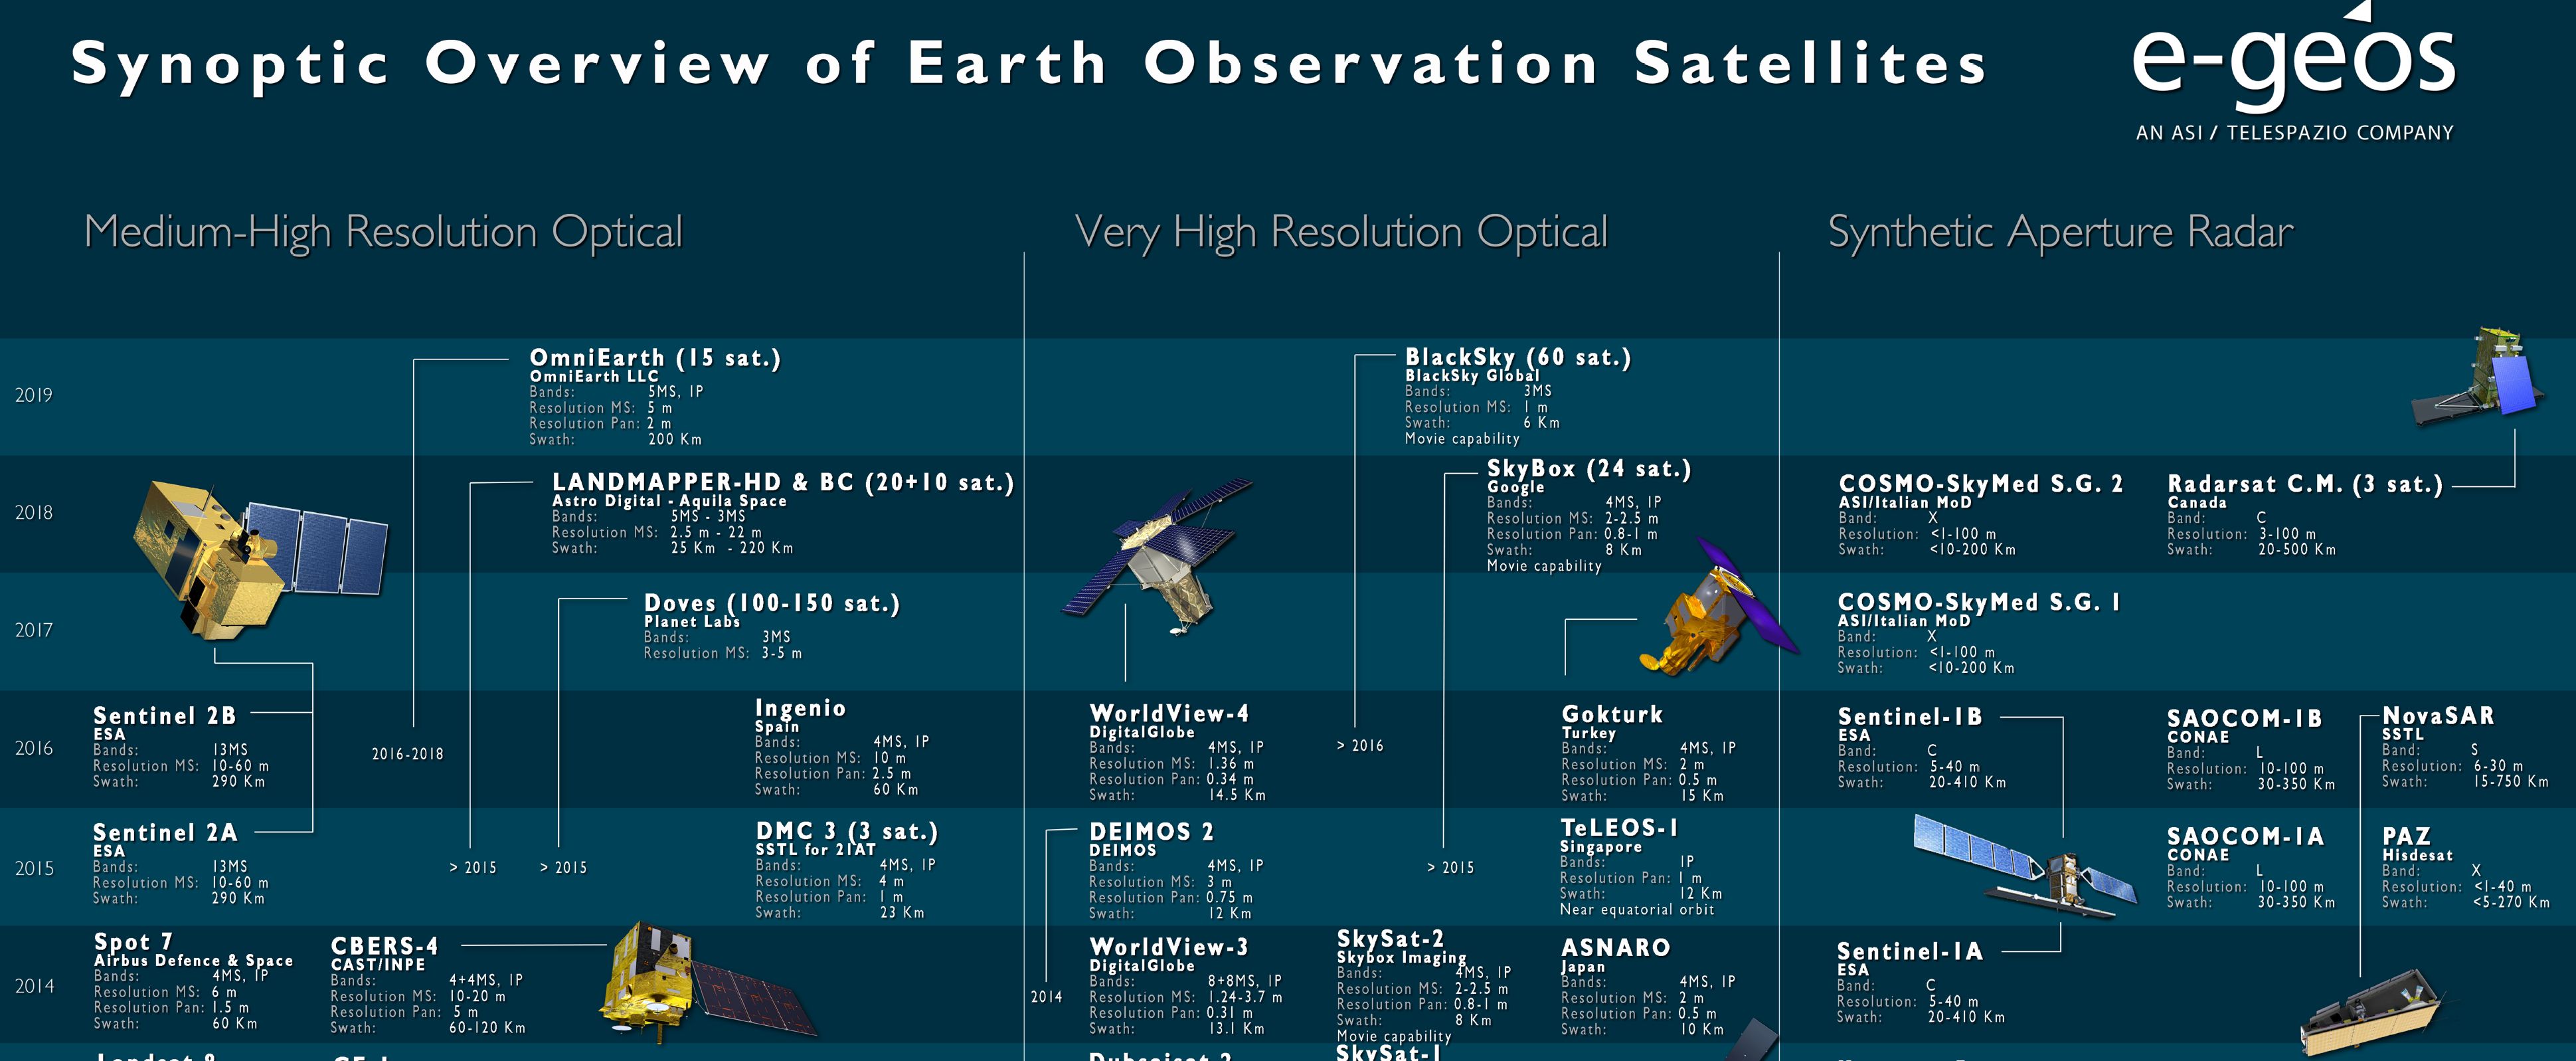 Example of some Earth Observation Satellites